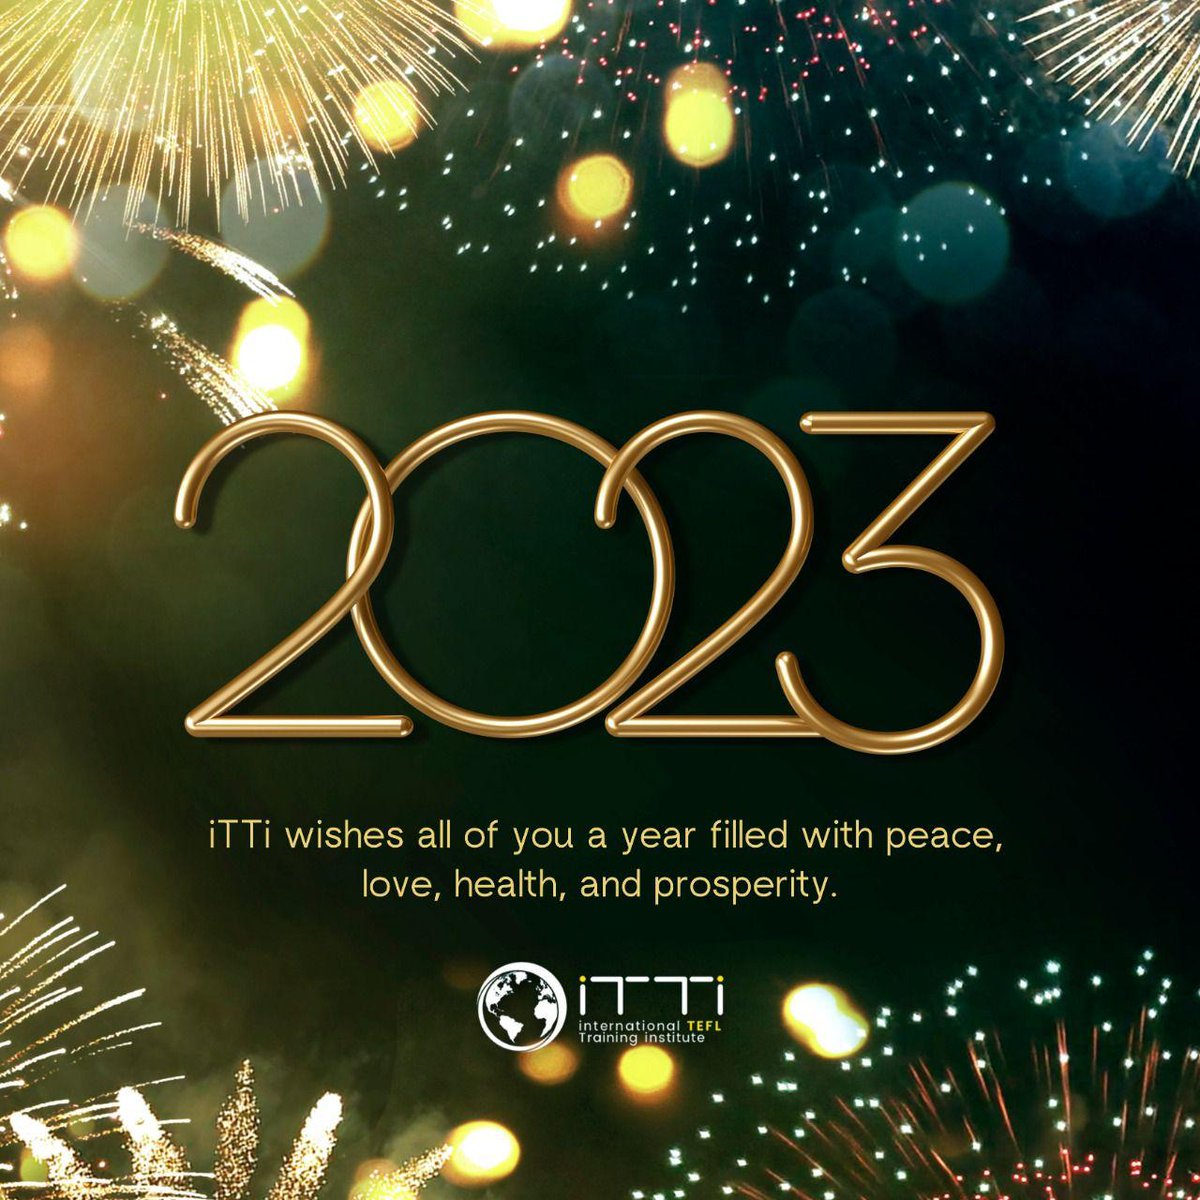 iTTi Philippines wishes everyone a happy and prosperous new year!
#itti #teflcertification